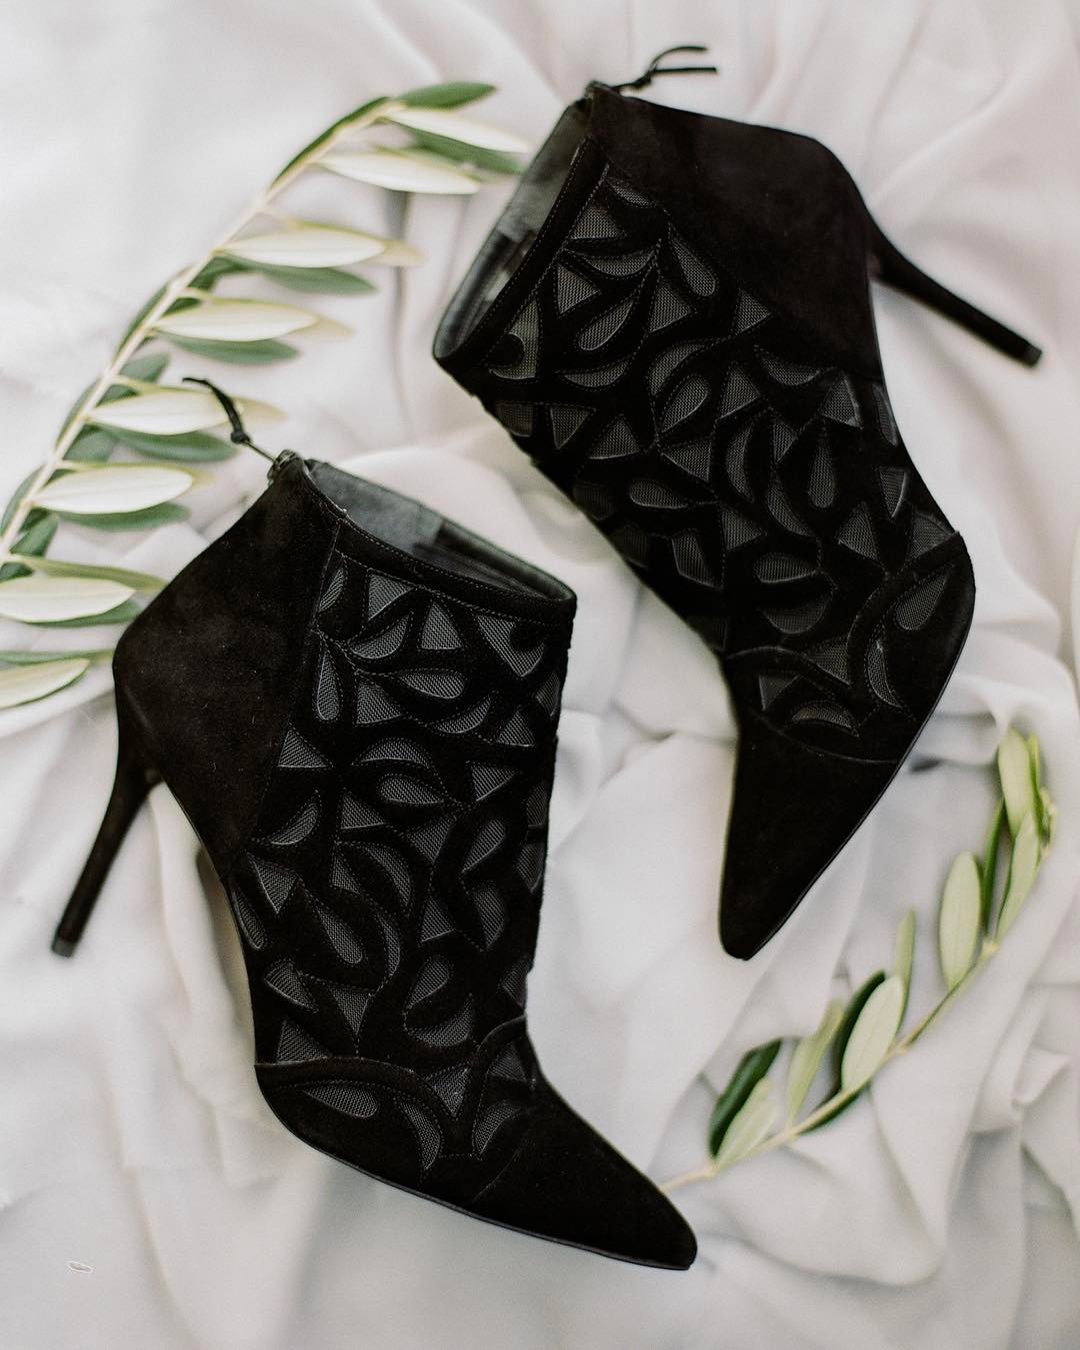 black shoes for wedding booties comfortable with heels rebeccayale